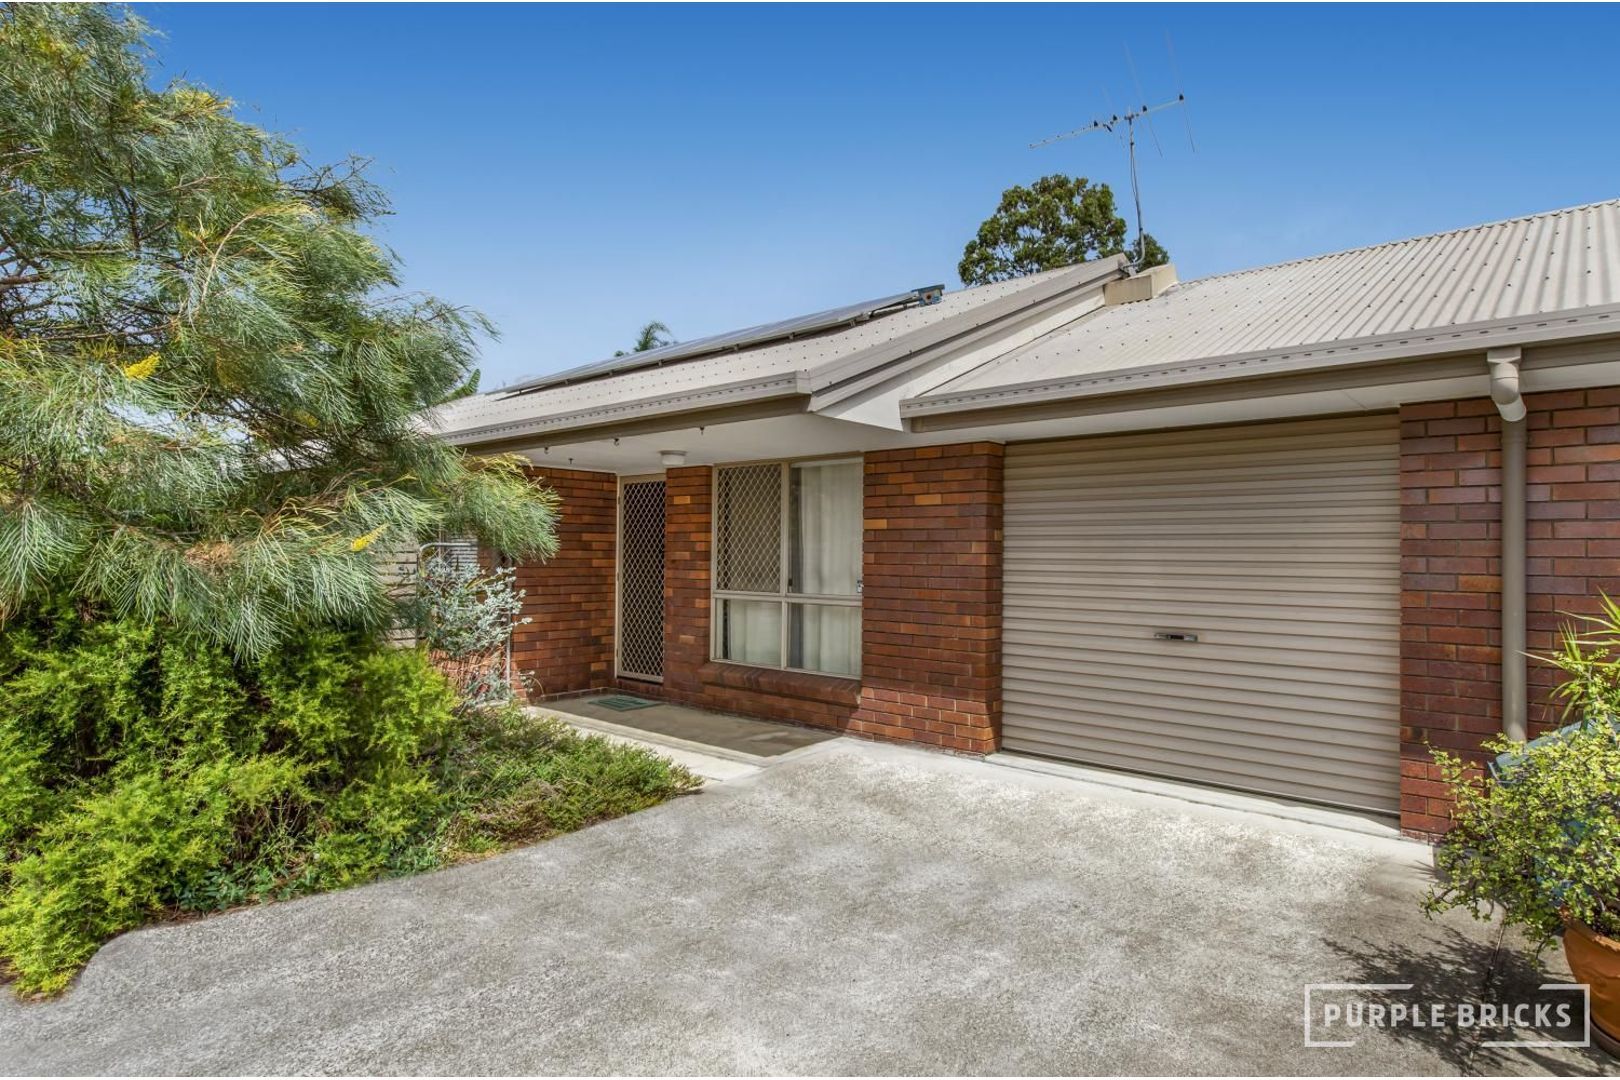 Unit 2, 44 Bluebell Street, Caboolture QLD 4510, Image 1